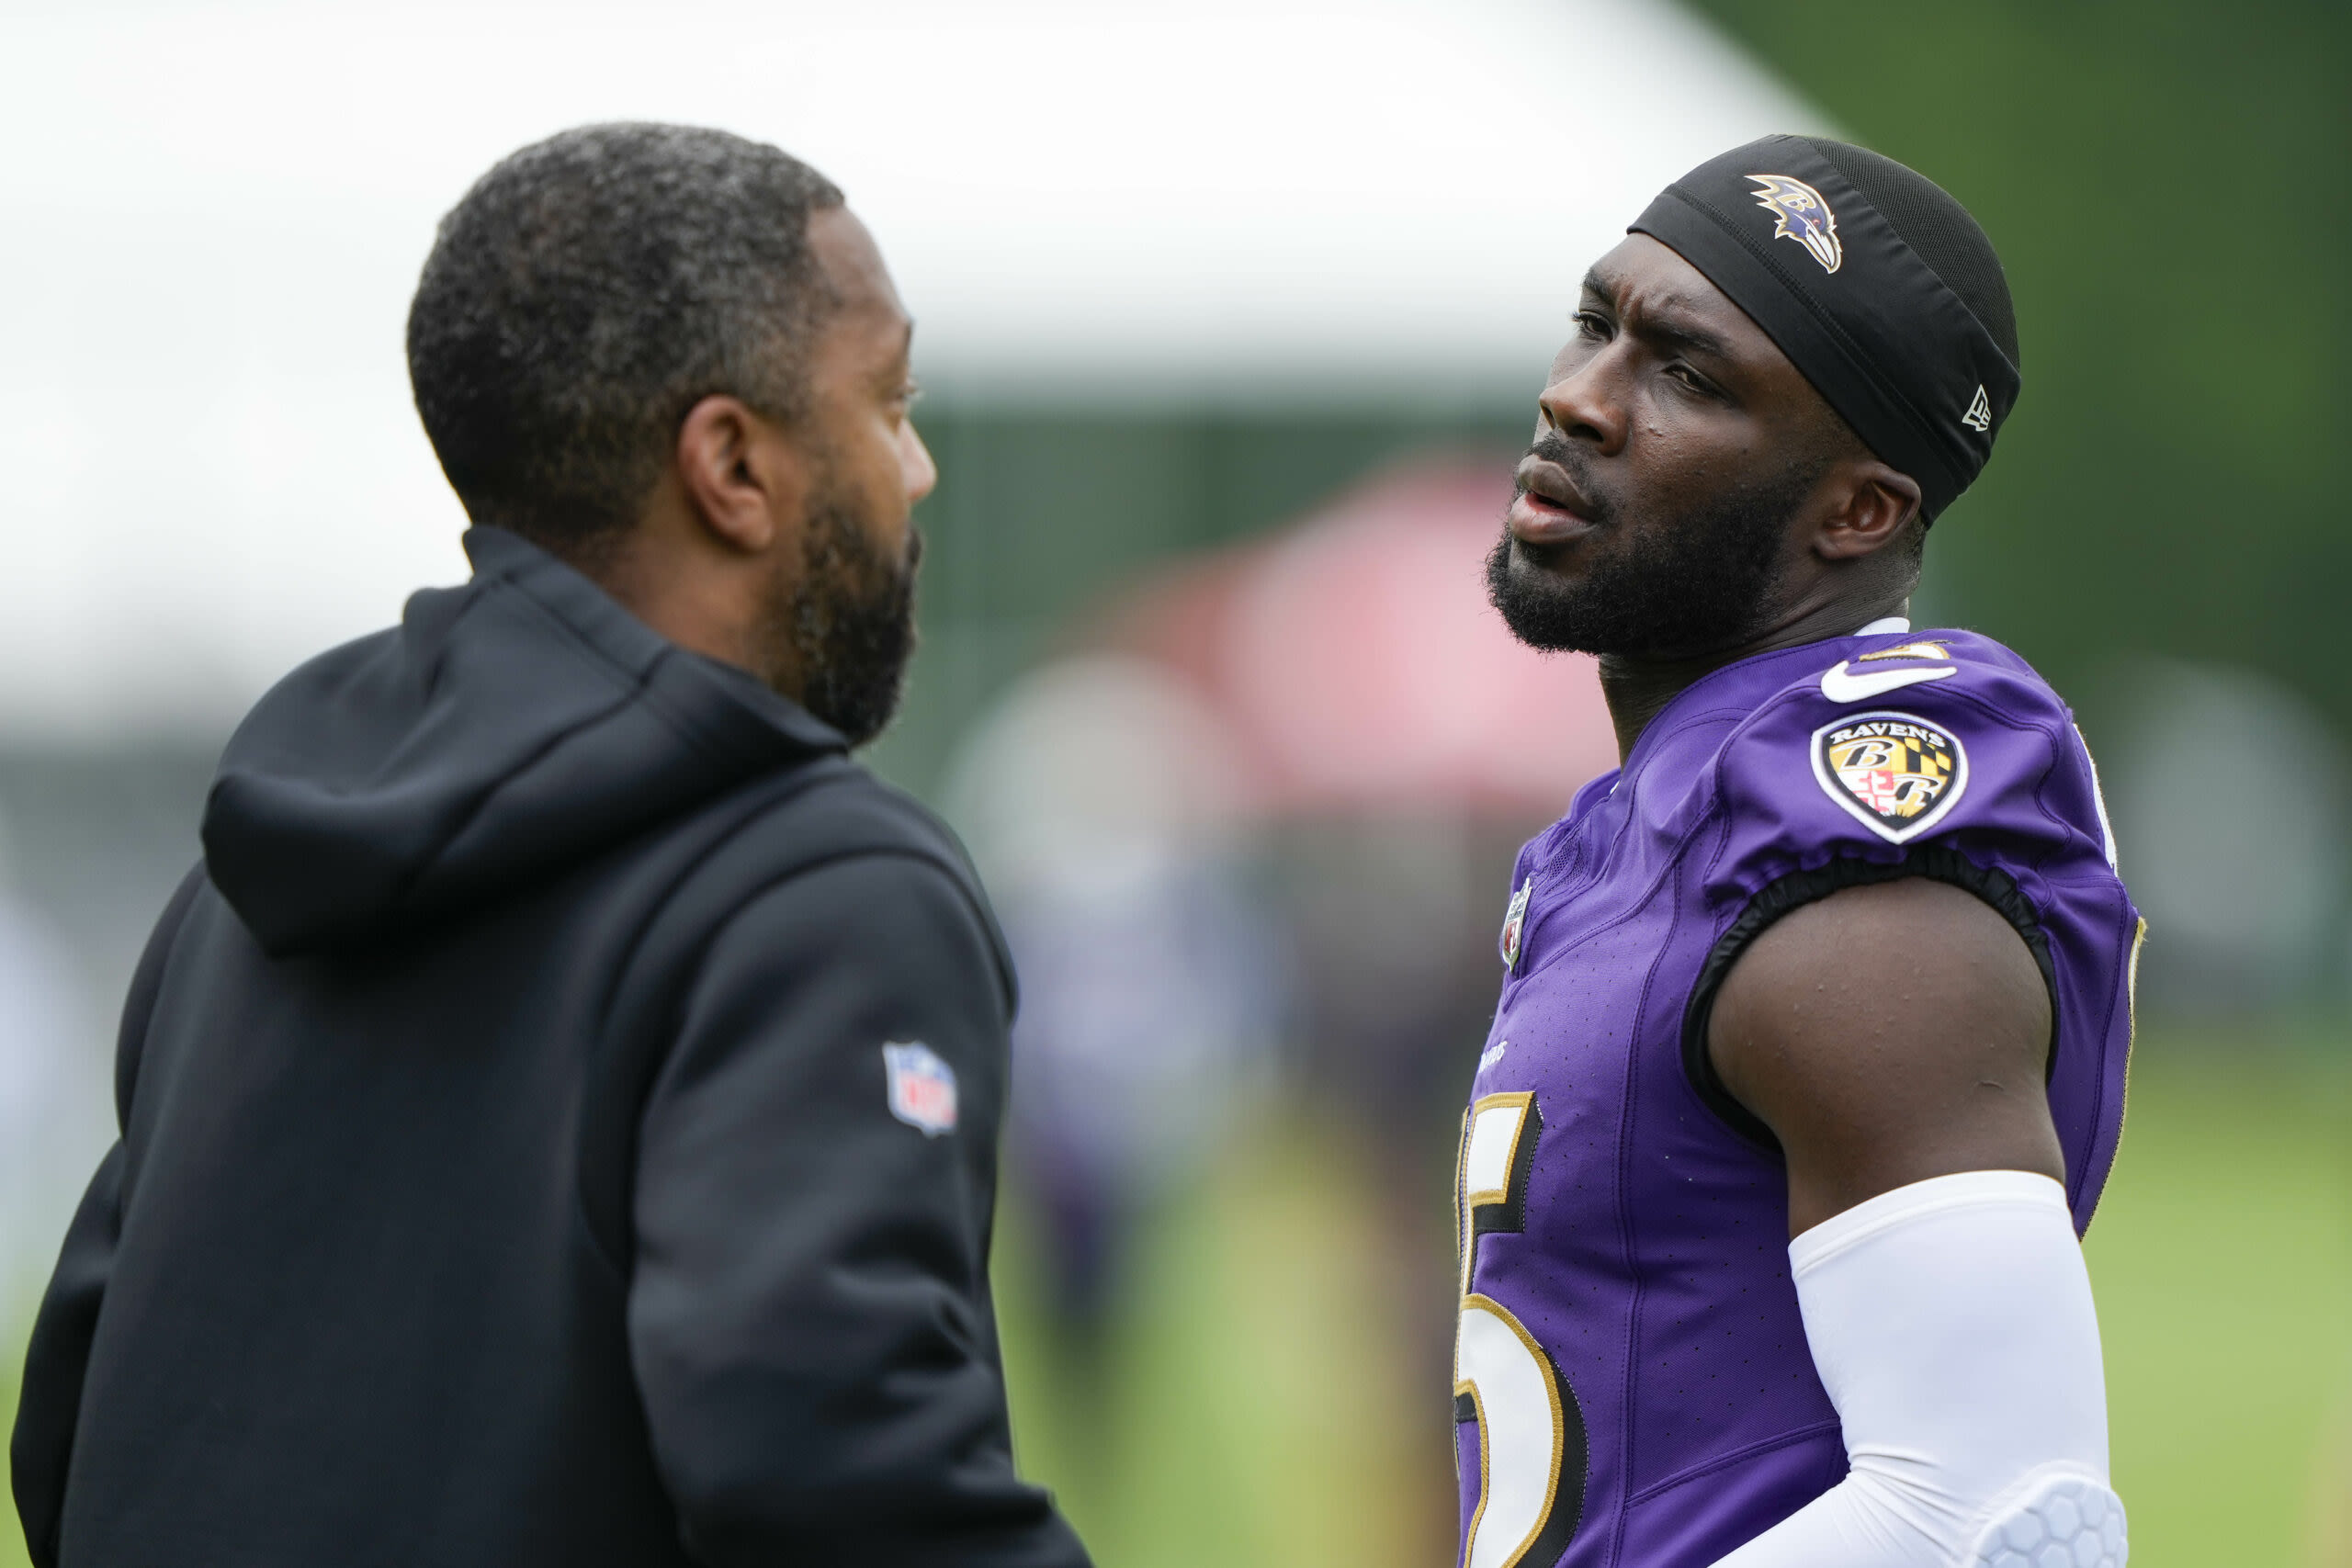 Ravens’ WR coach Greg Lewis is poised to become a hot coaching commodity